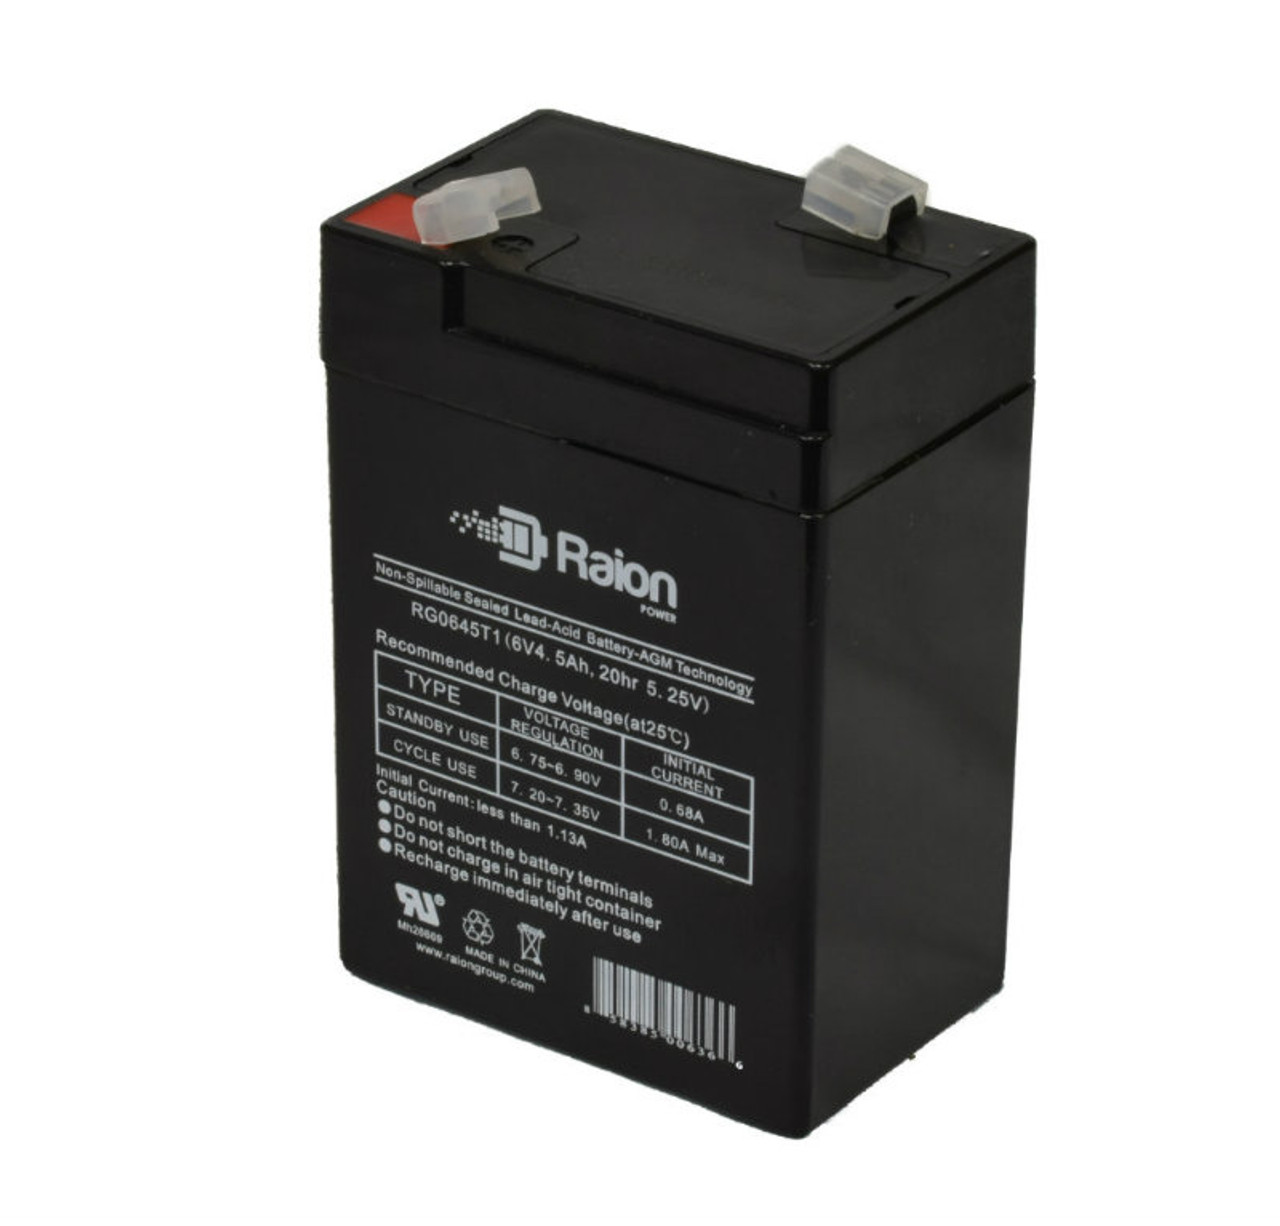 Raion Power RG0645T1 6V 4.5Ah Replacement Battery Cartridge for SeaWill SW640K